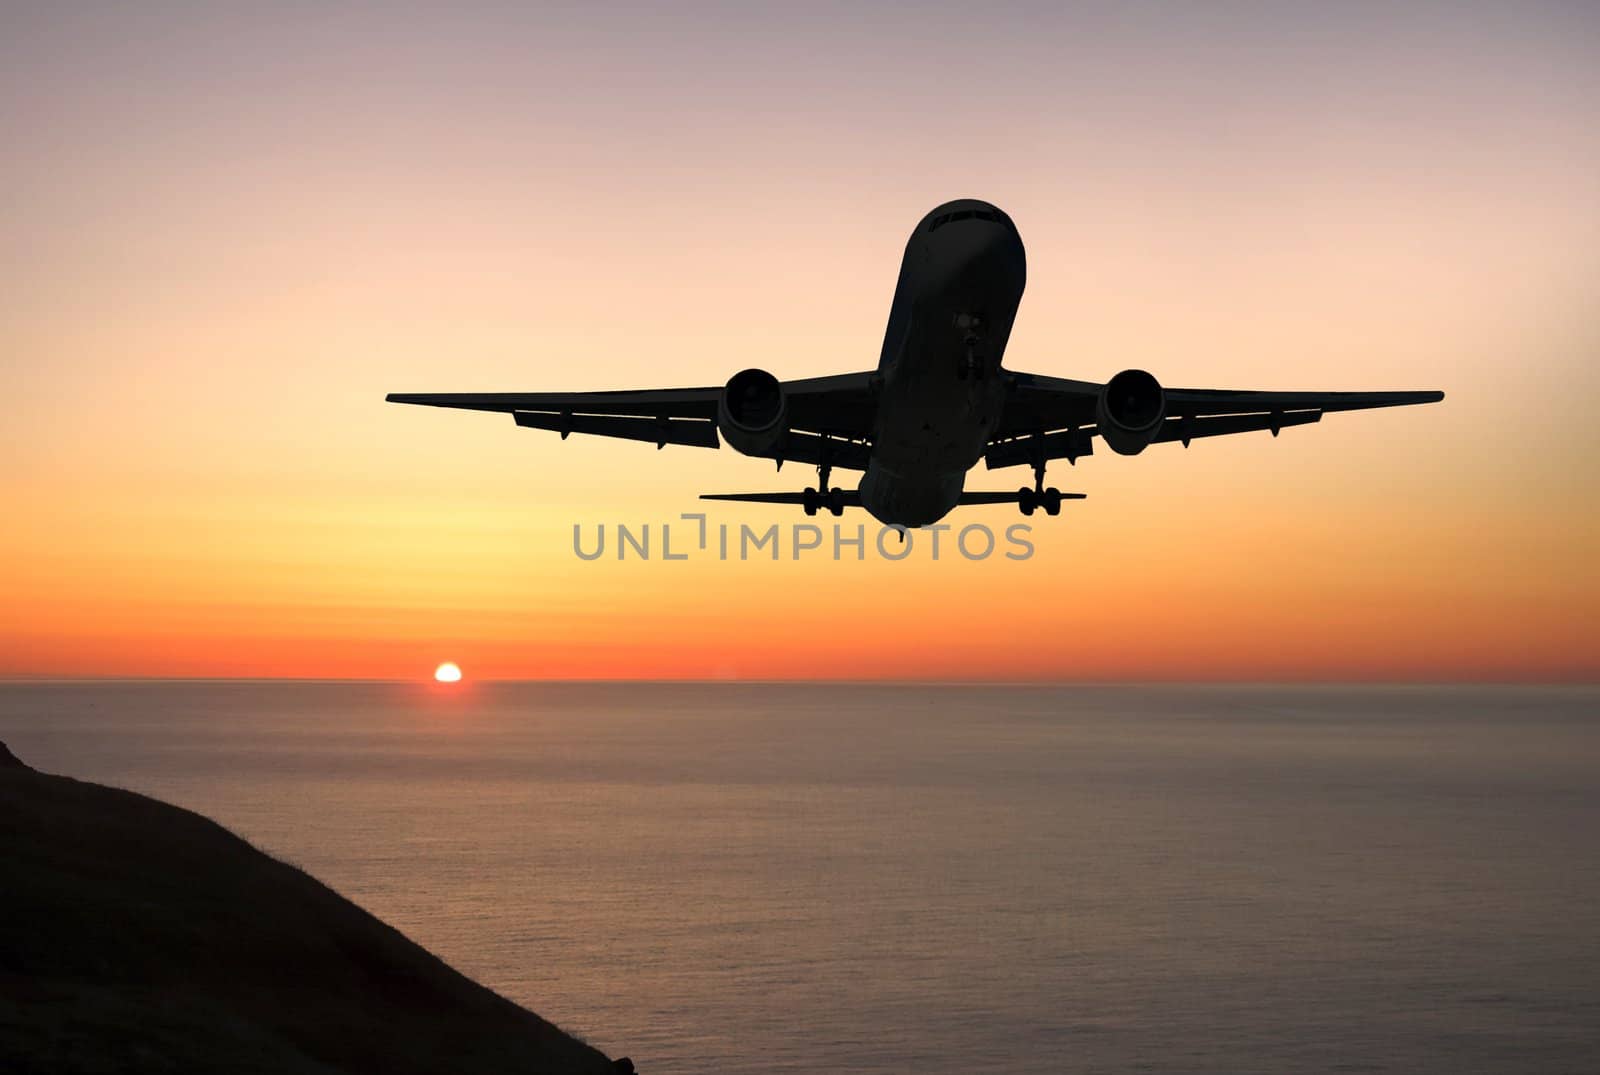 Large airliner approaching to land at sunrise